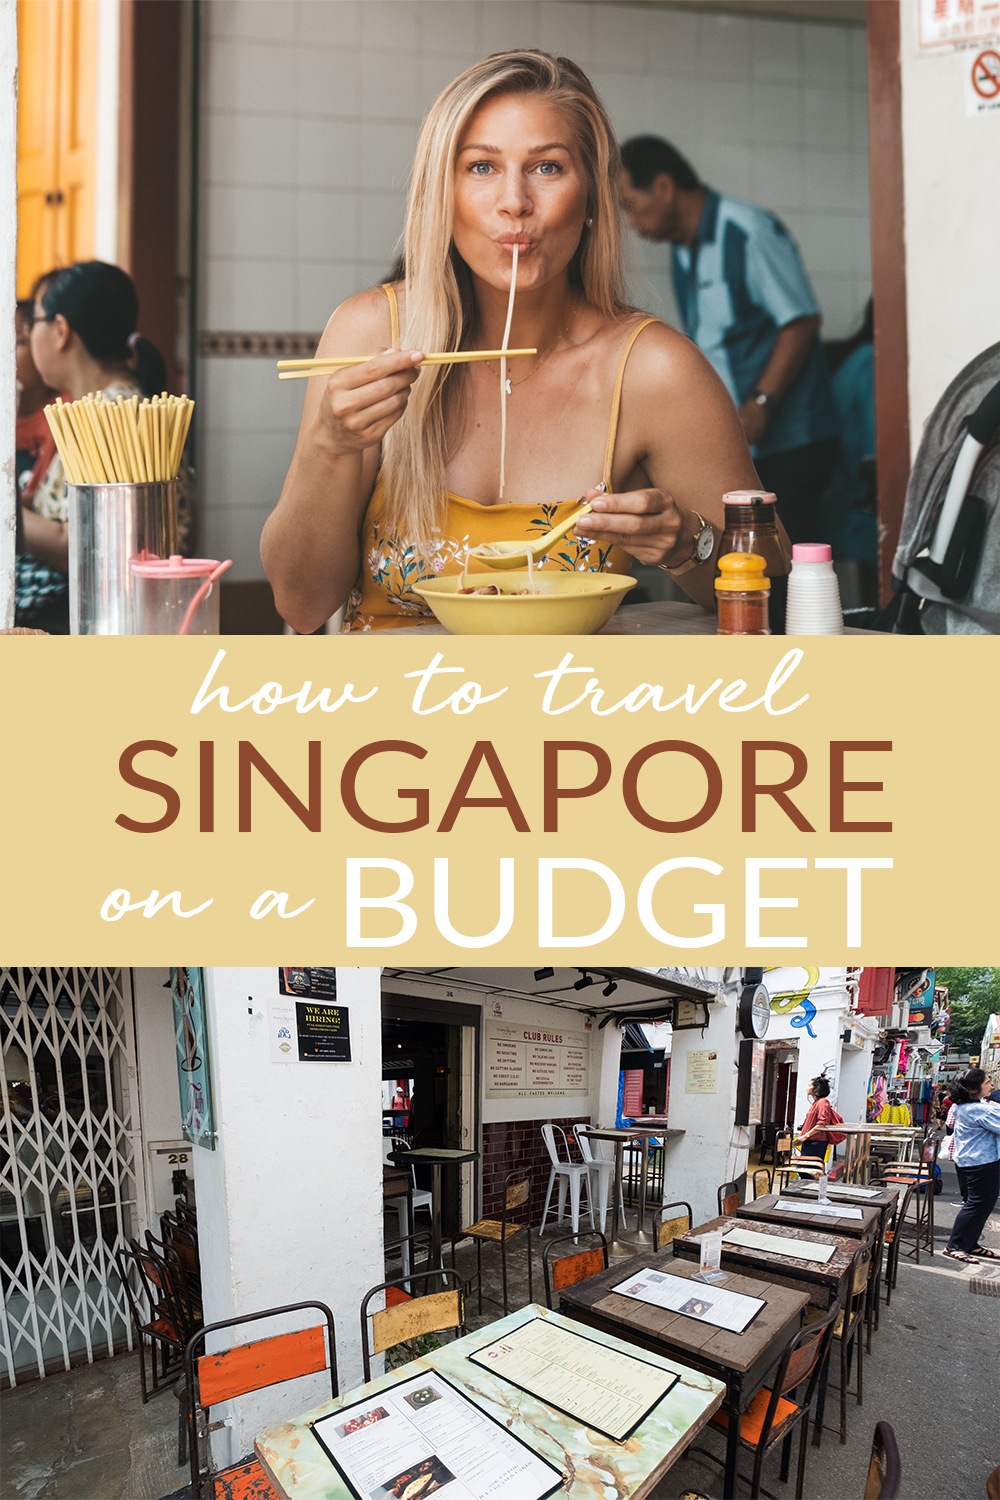 How to Travel Singapore on a Budget